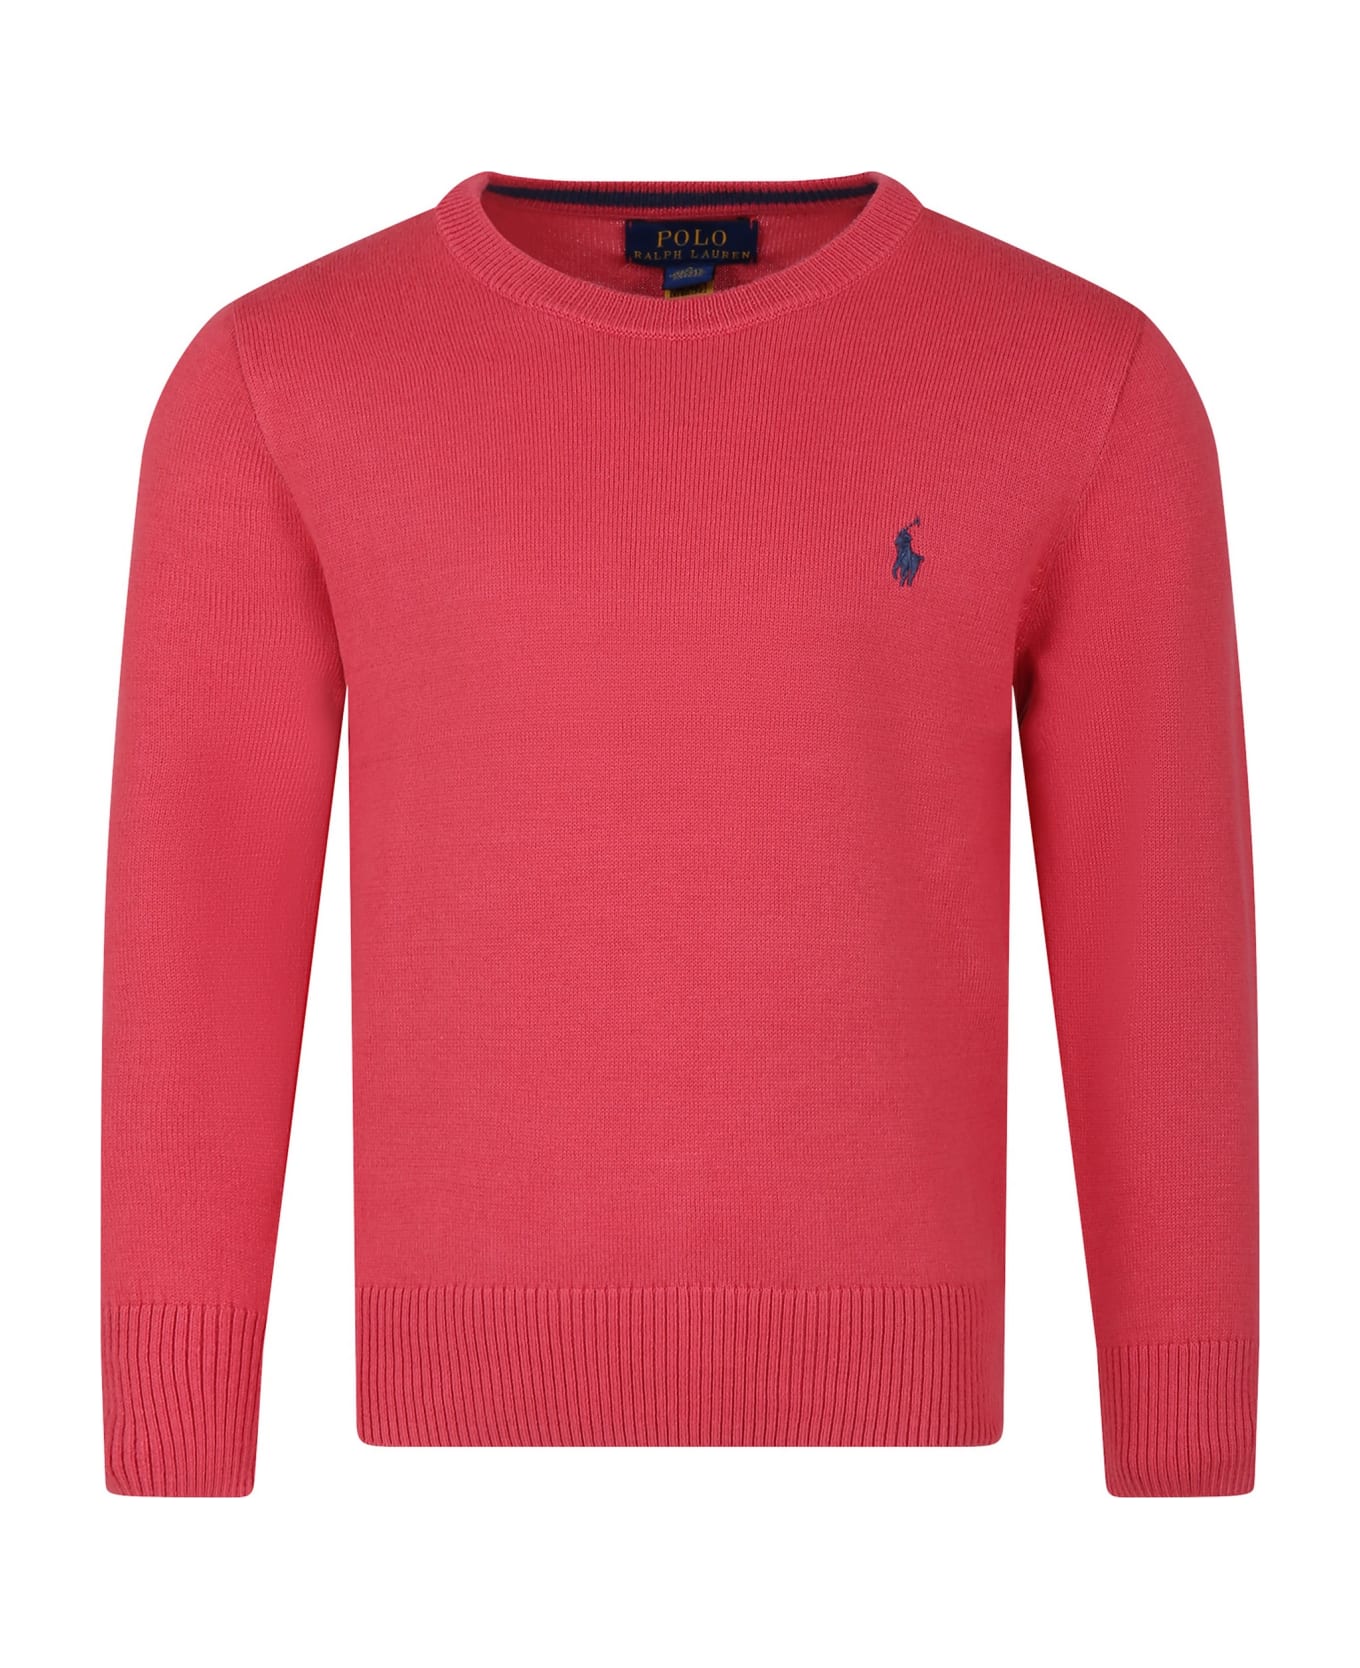 Ralph Lauren Red Sweater For Boy With Embroidery - Red